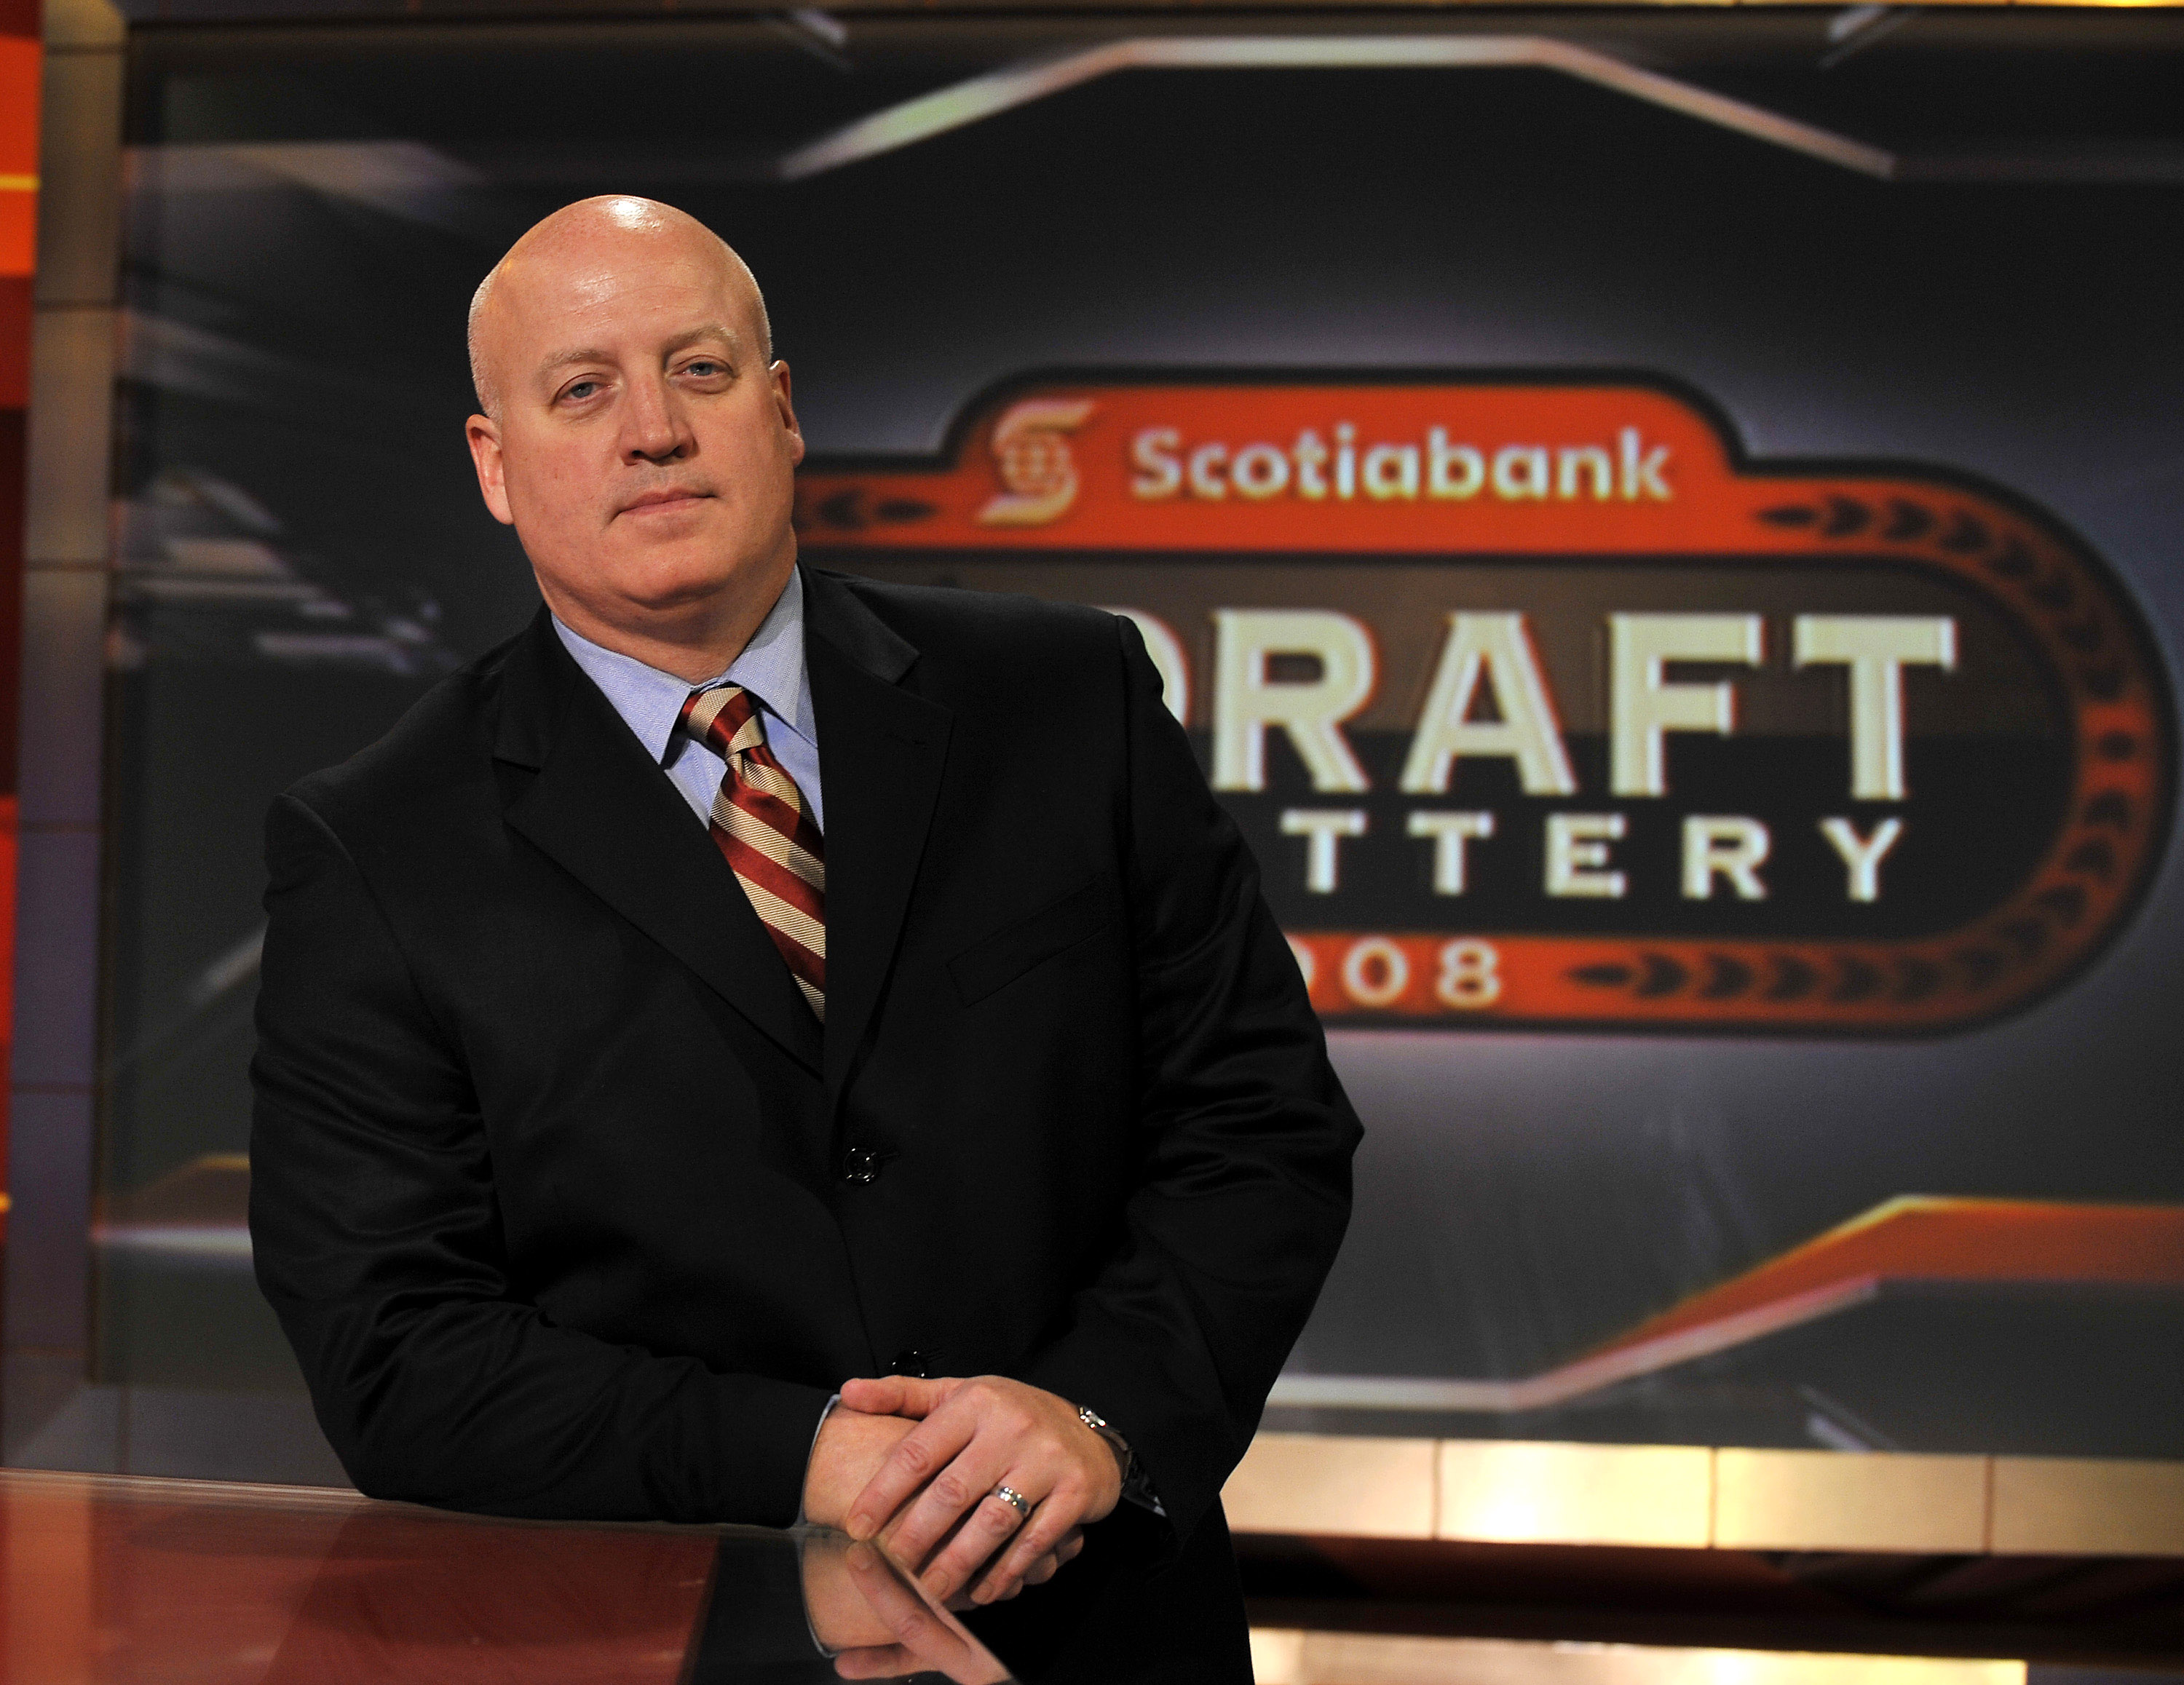 NHL Deputy Commissioner Bill Daly prepares for the NHL Draft lottery April 7, 2008 at the TSN Studios in Toronto, Ontario, Canada.